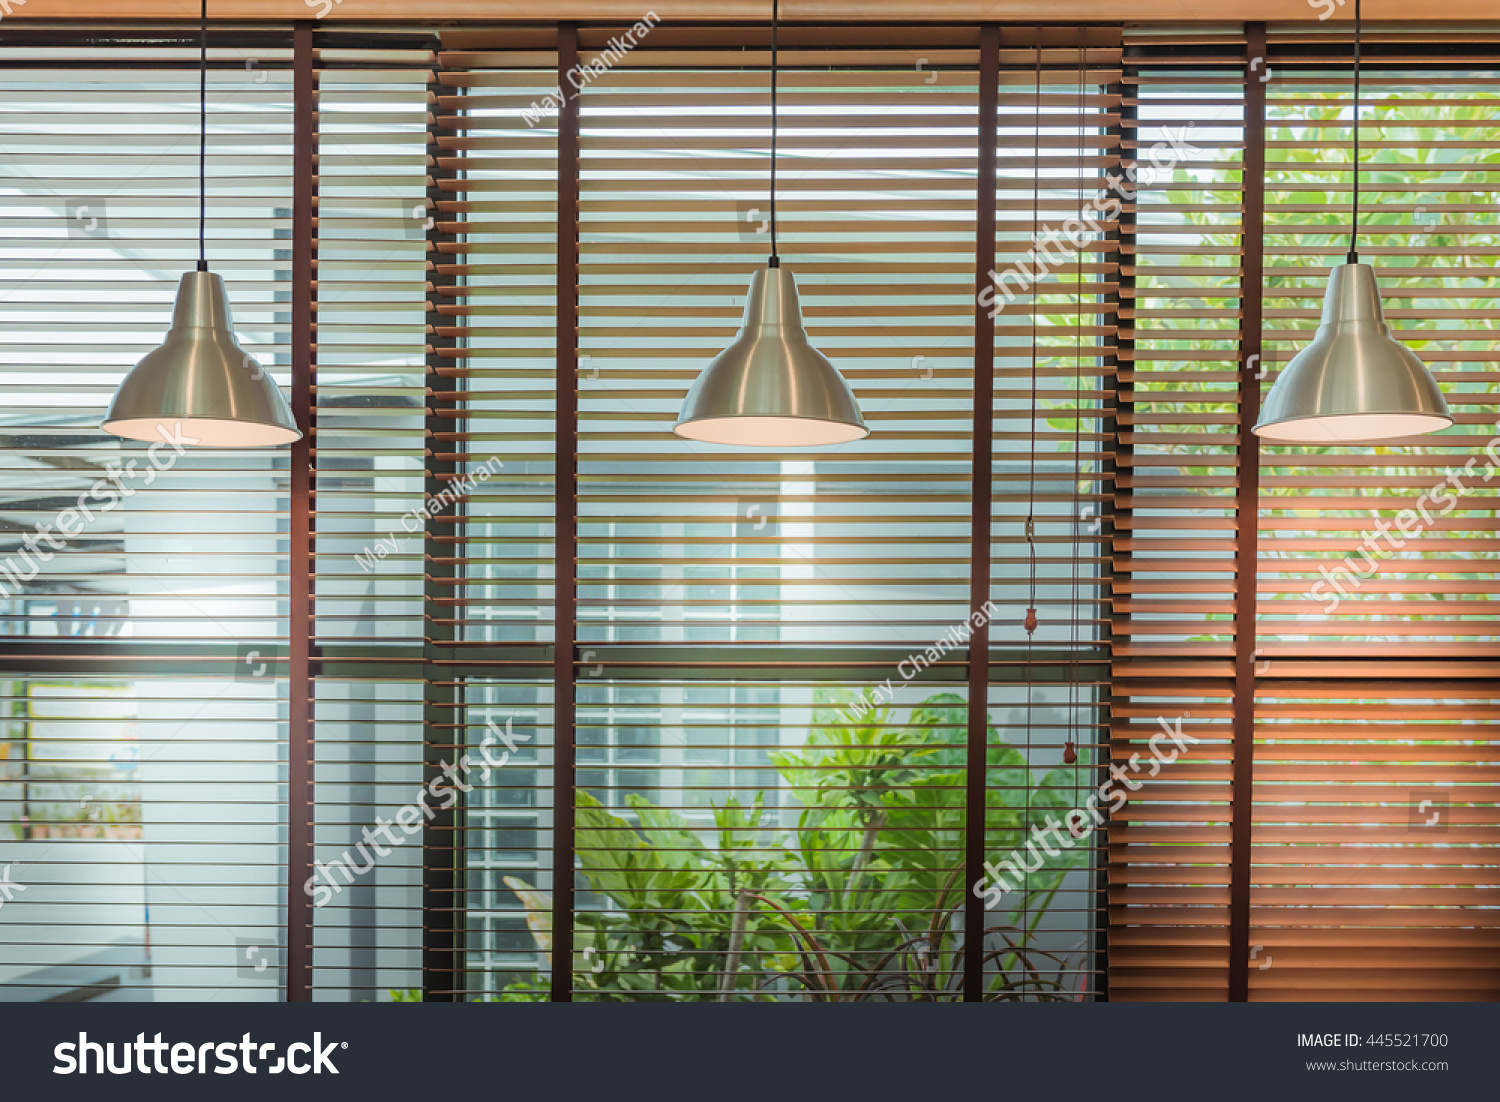 Venetian blind window mask, room interior with ceiling lamp beam, blinds window decoration concept for banner or background. #445521700